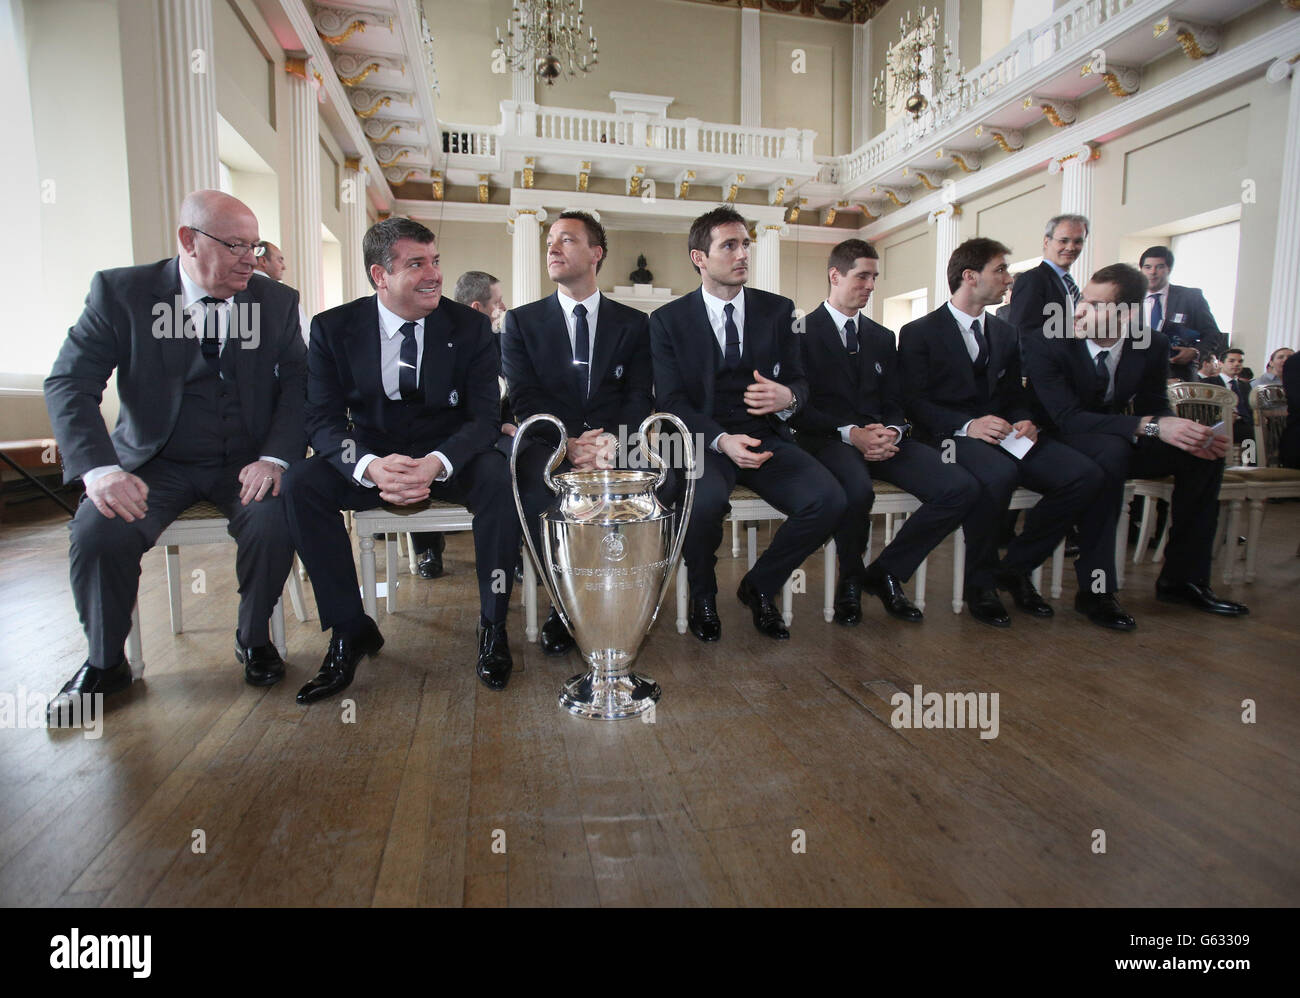 (left to right) Chelsea Club Secretary David Barnard, Chief Executive Ron Gourlay, John Terry, Frank Lampard, Fernando Torres, Branislav Ivanovic and Petr Cech during the UEFA Champions League Trophy Handover at Banqueting House, London. Stock Photo